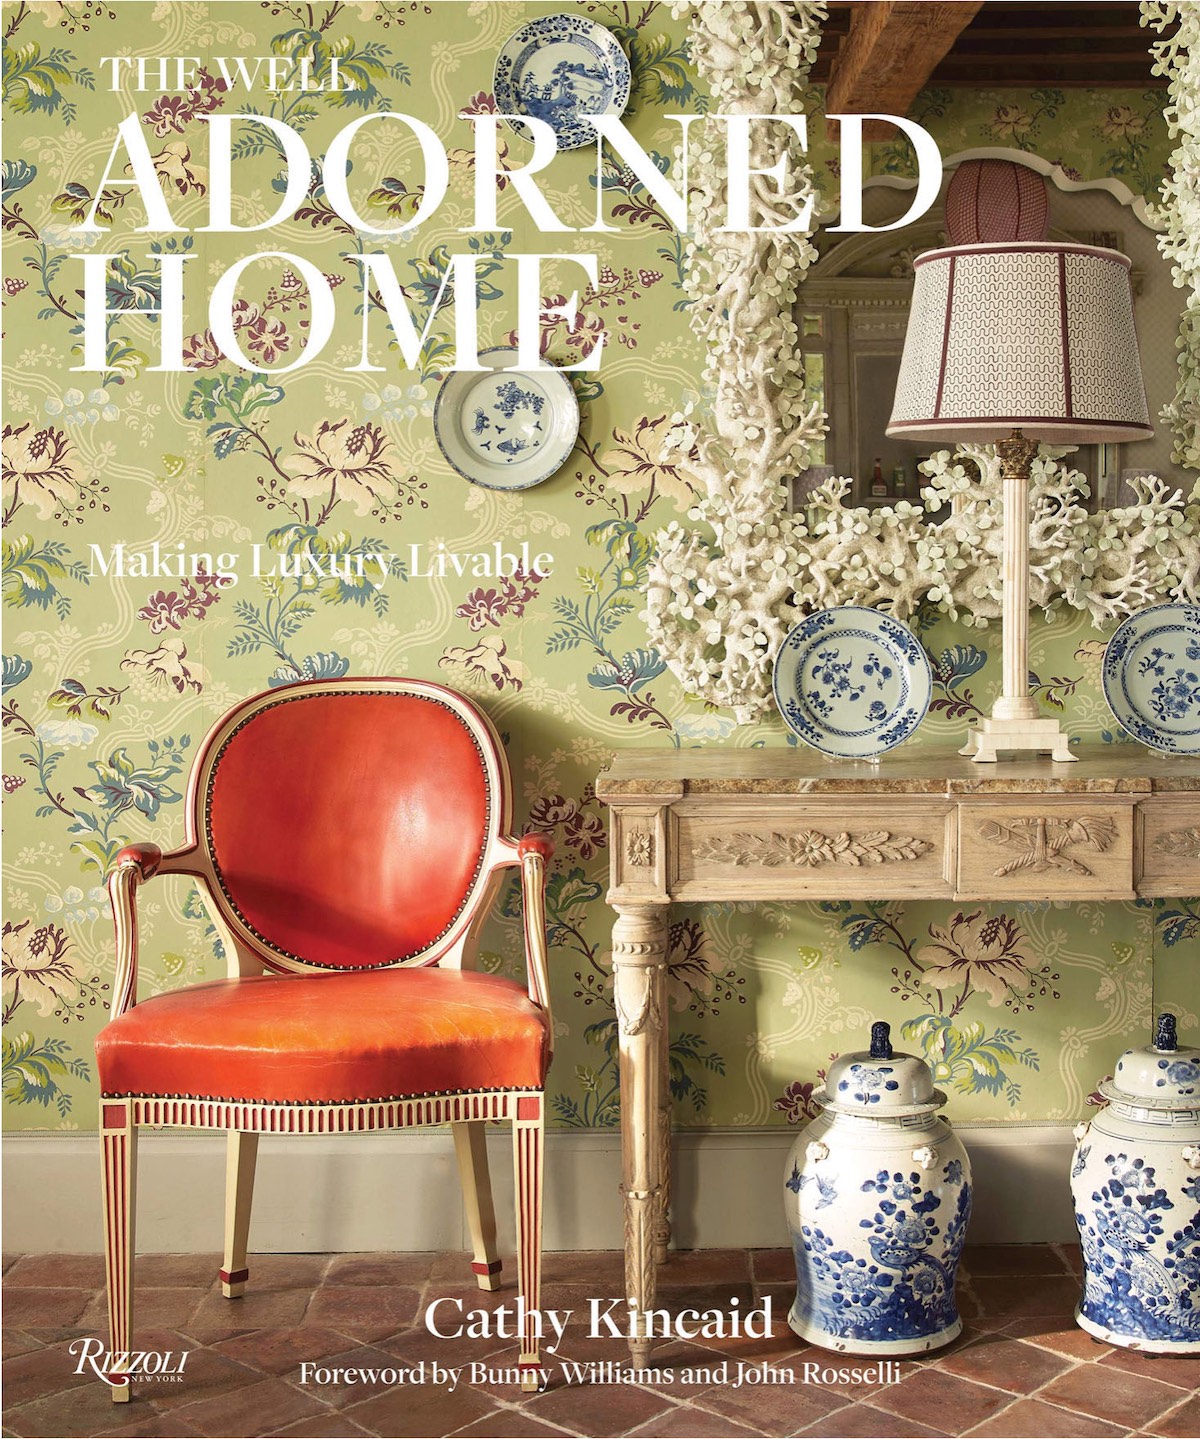 Cover of Well Adorned Home with orange chair and chinoiserie ginger jars.